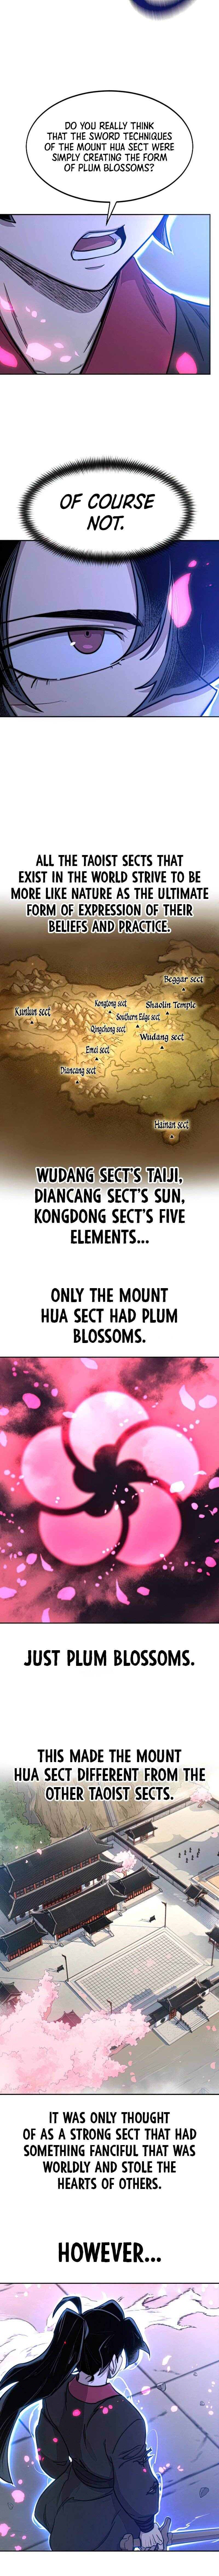 return_of_the_mount_hua_sect_68_9